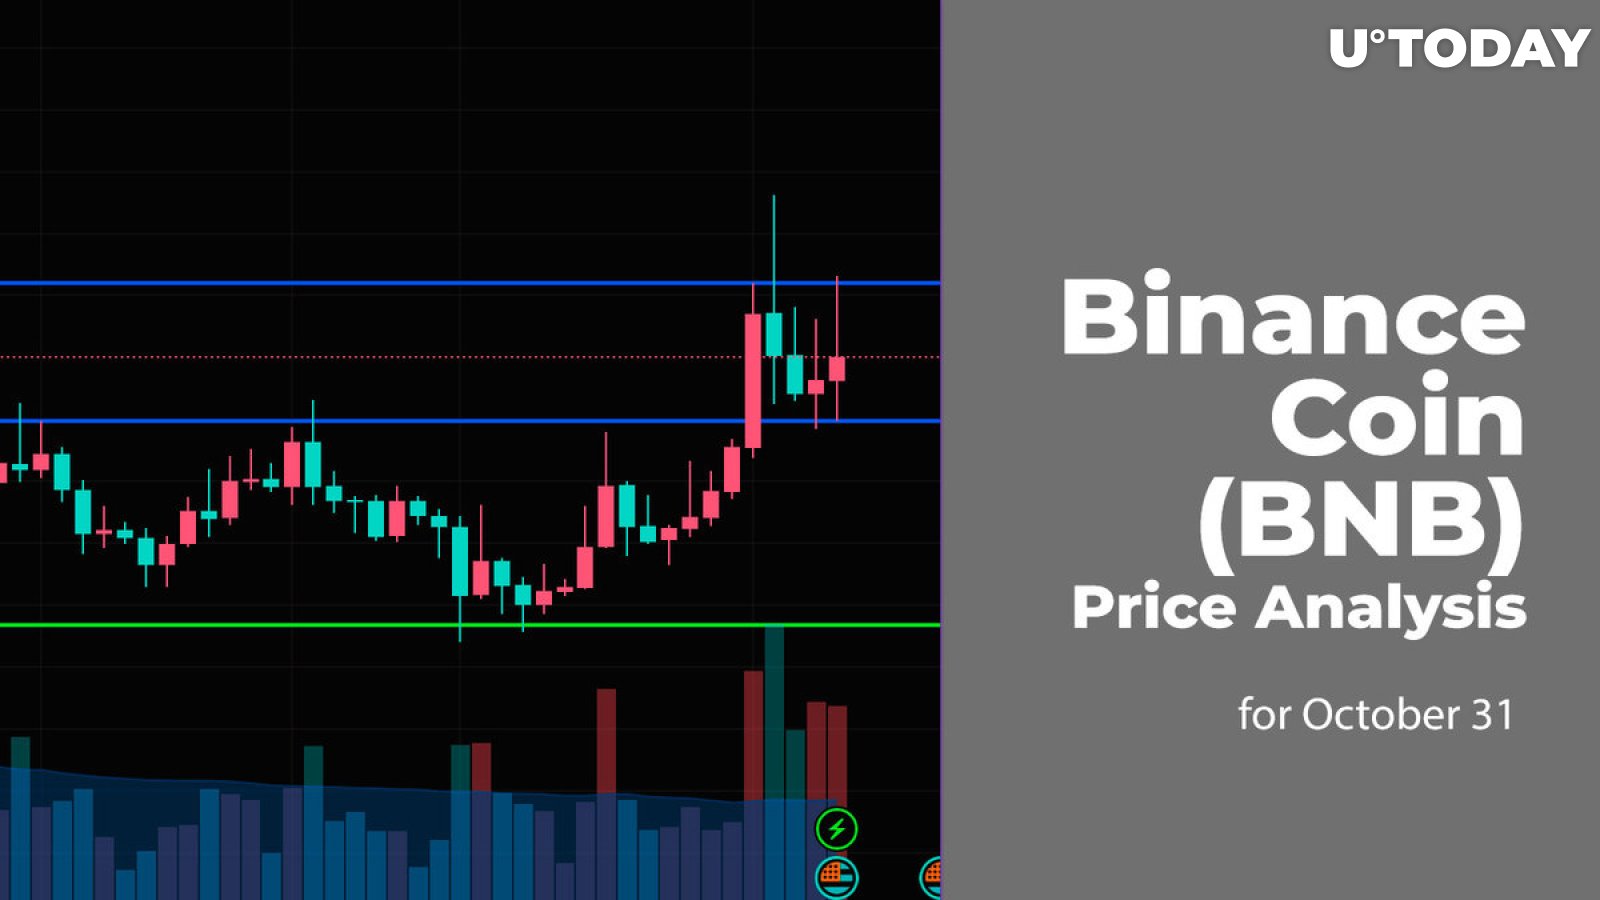 Binance Coin (BNB) Price Analysis for October 31